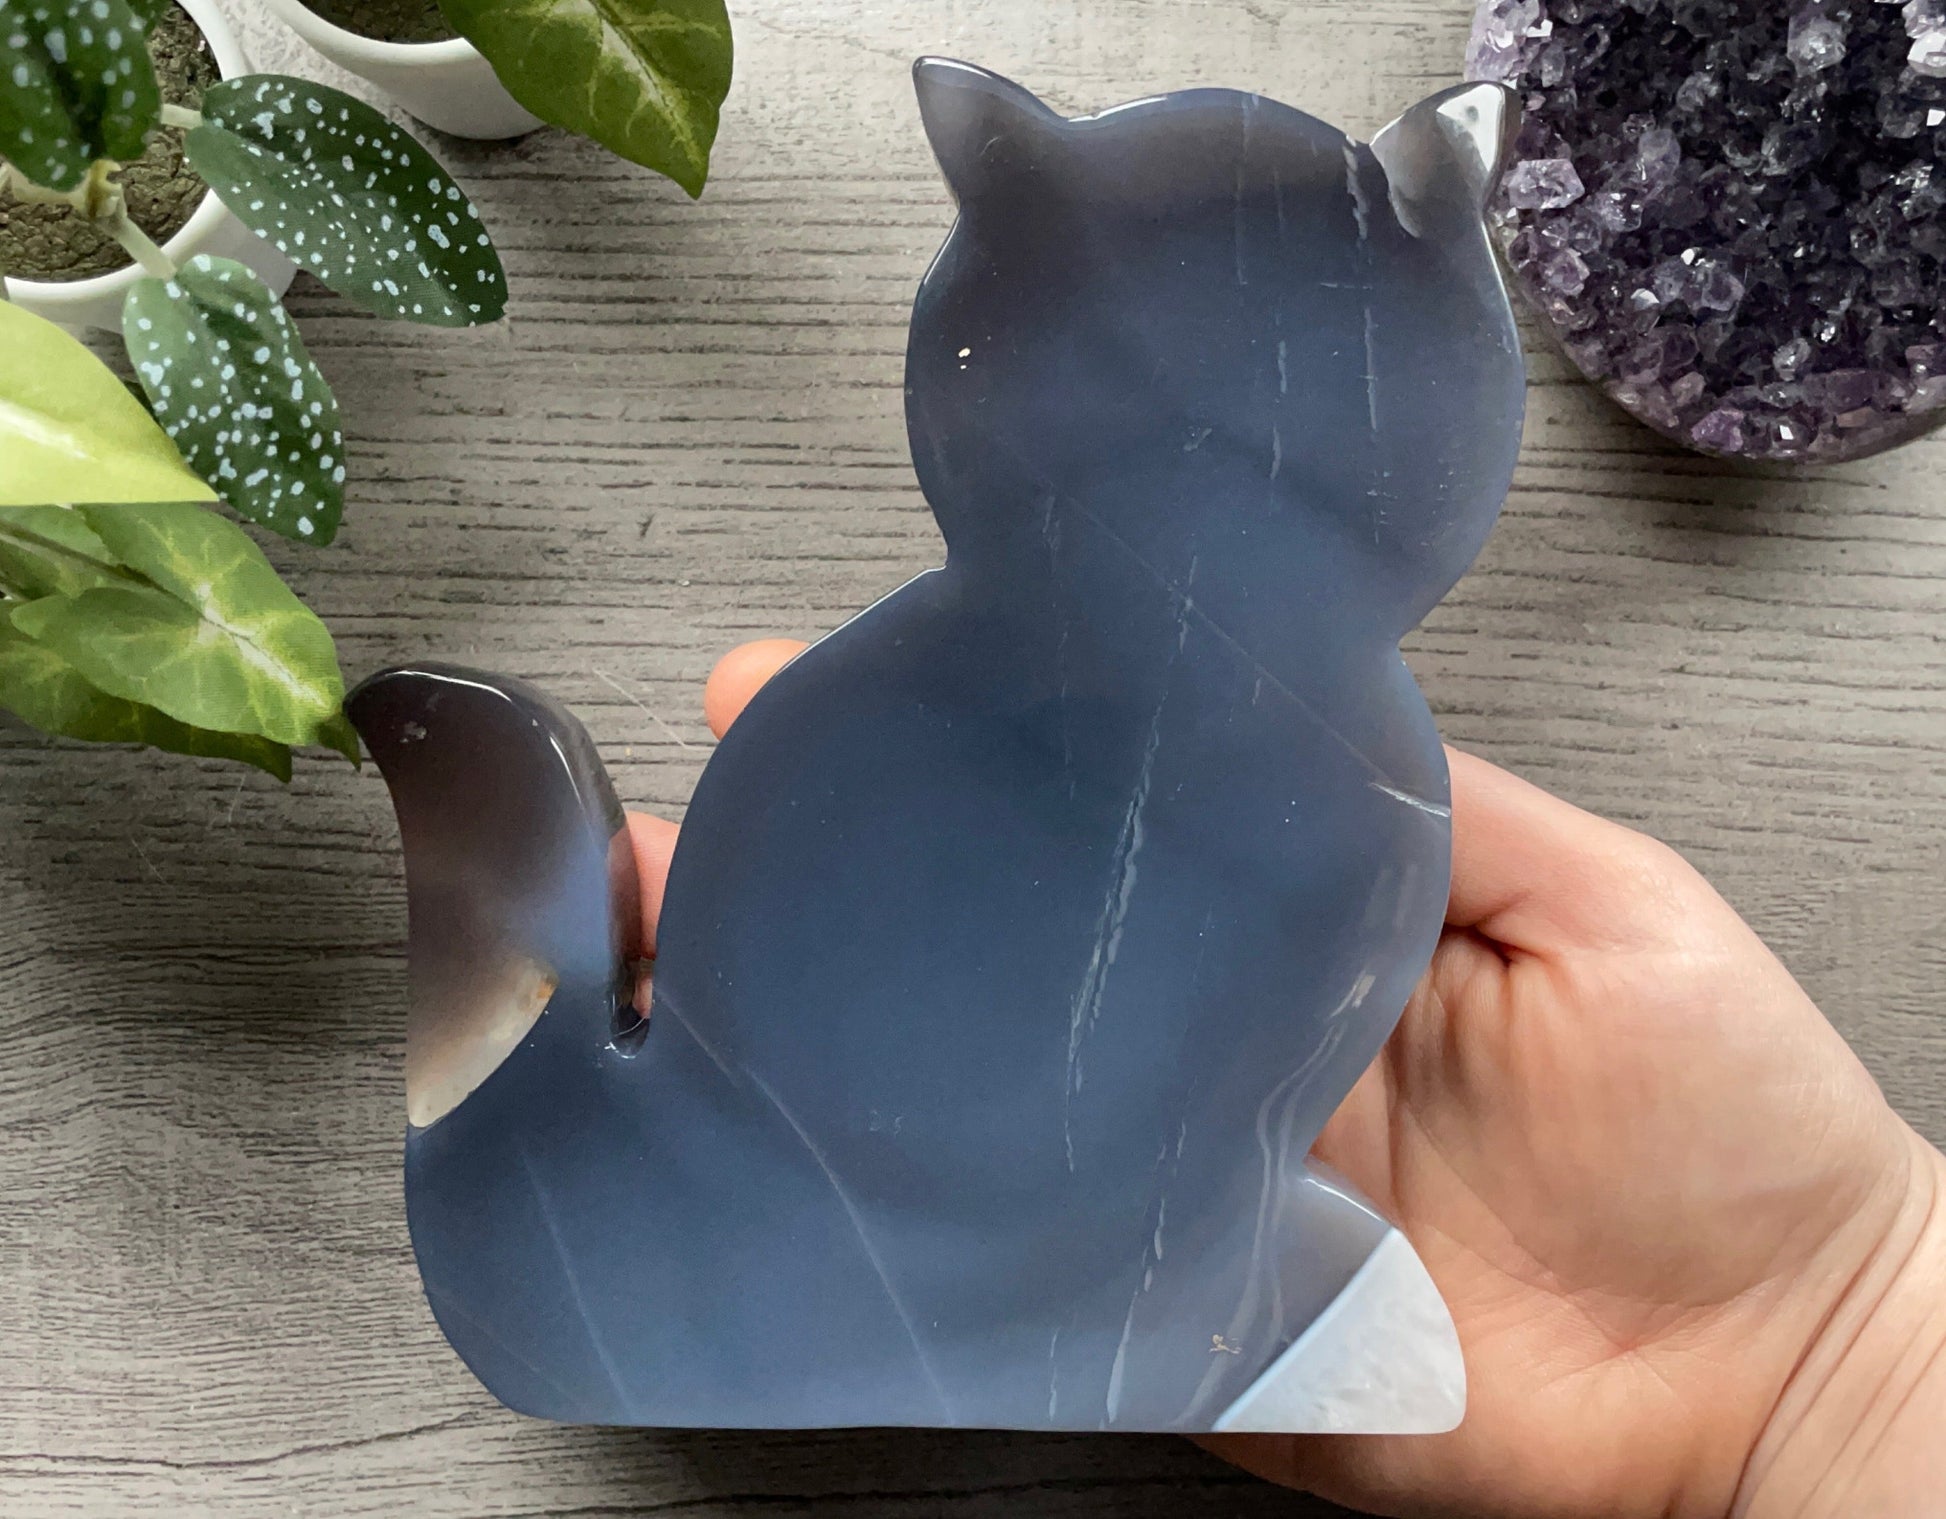 Pictured is a cat carved out of agate.